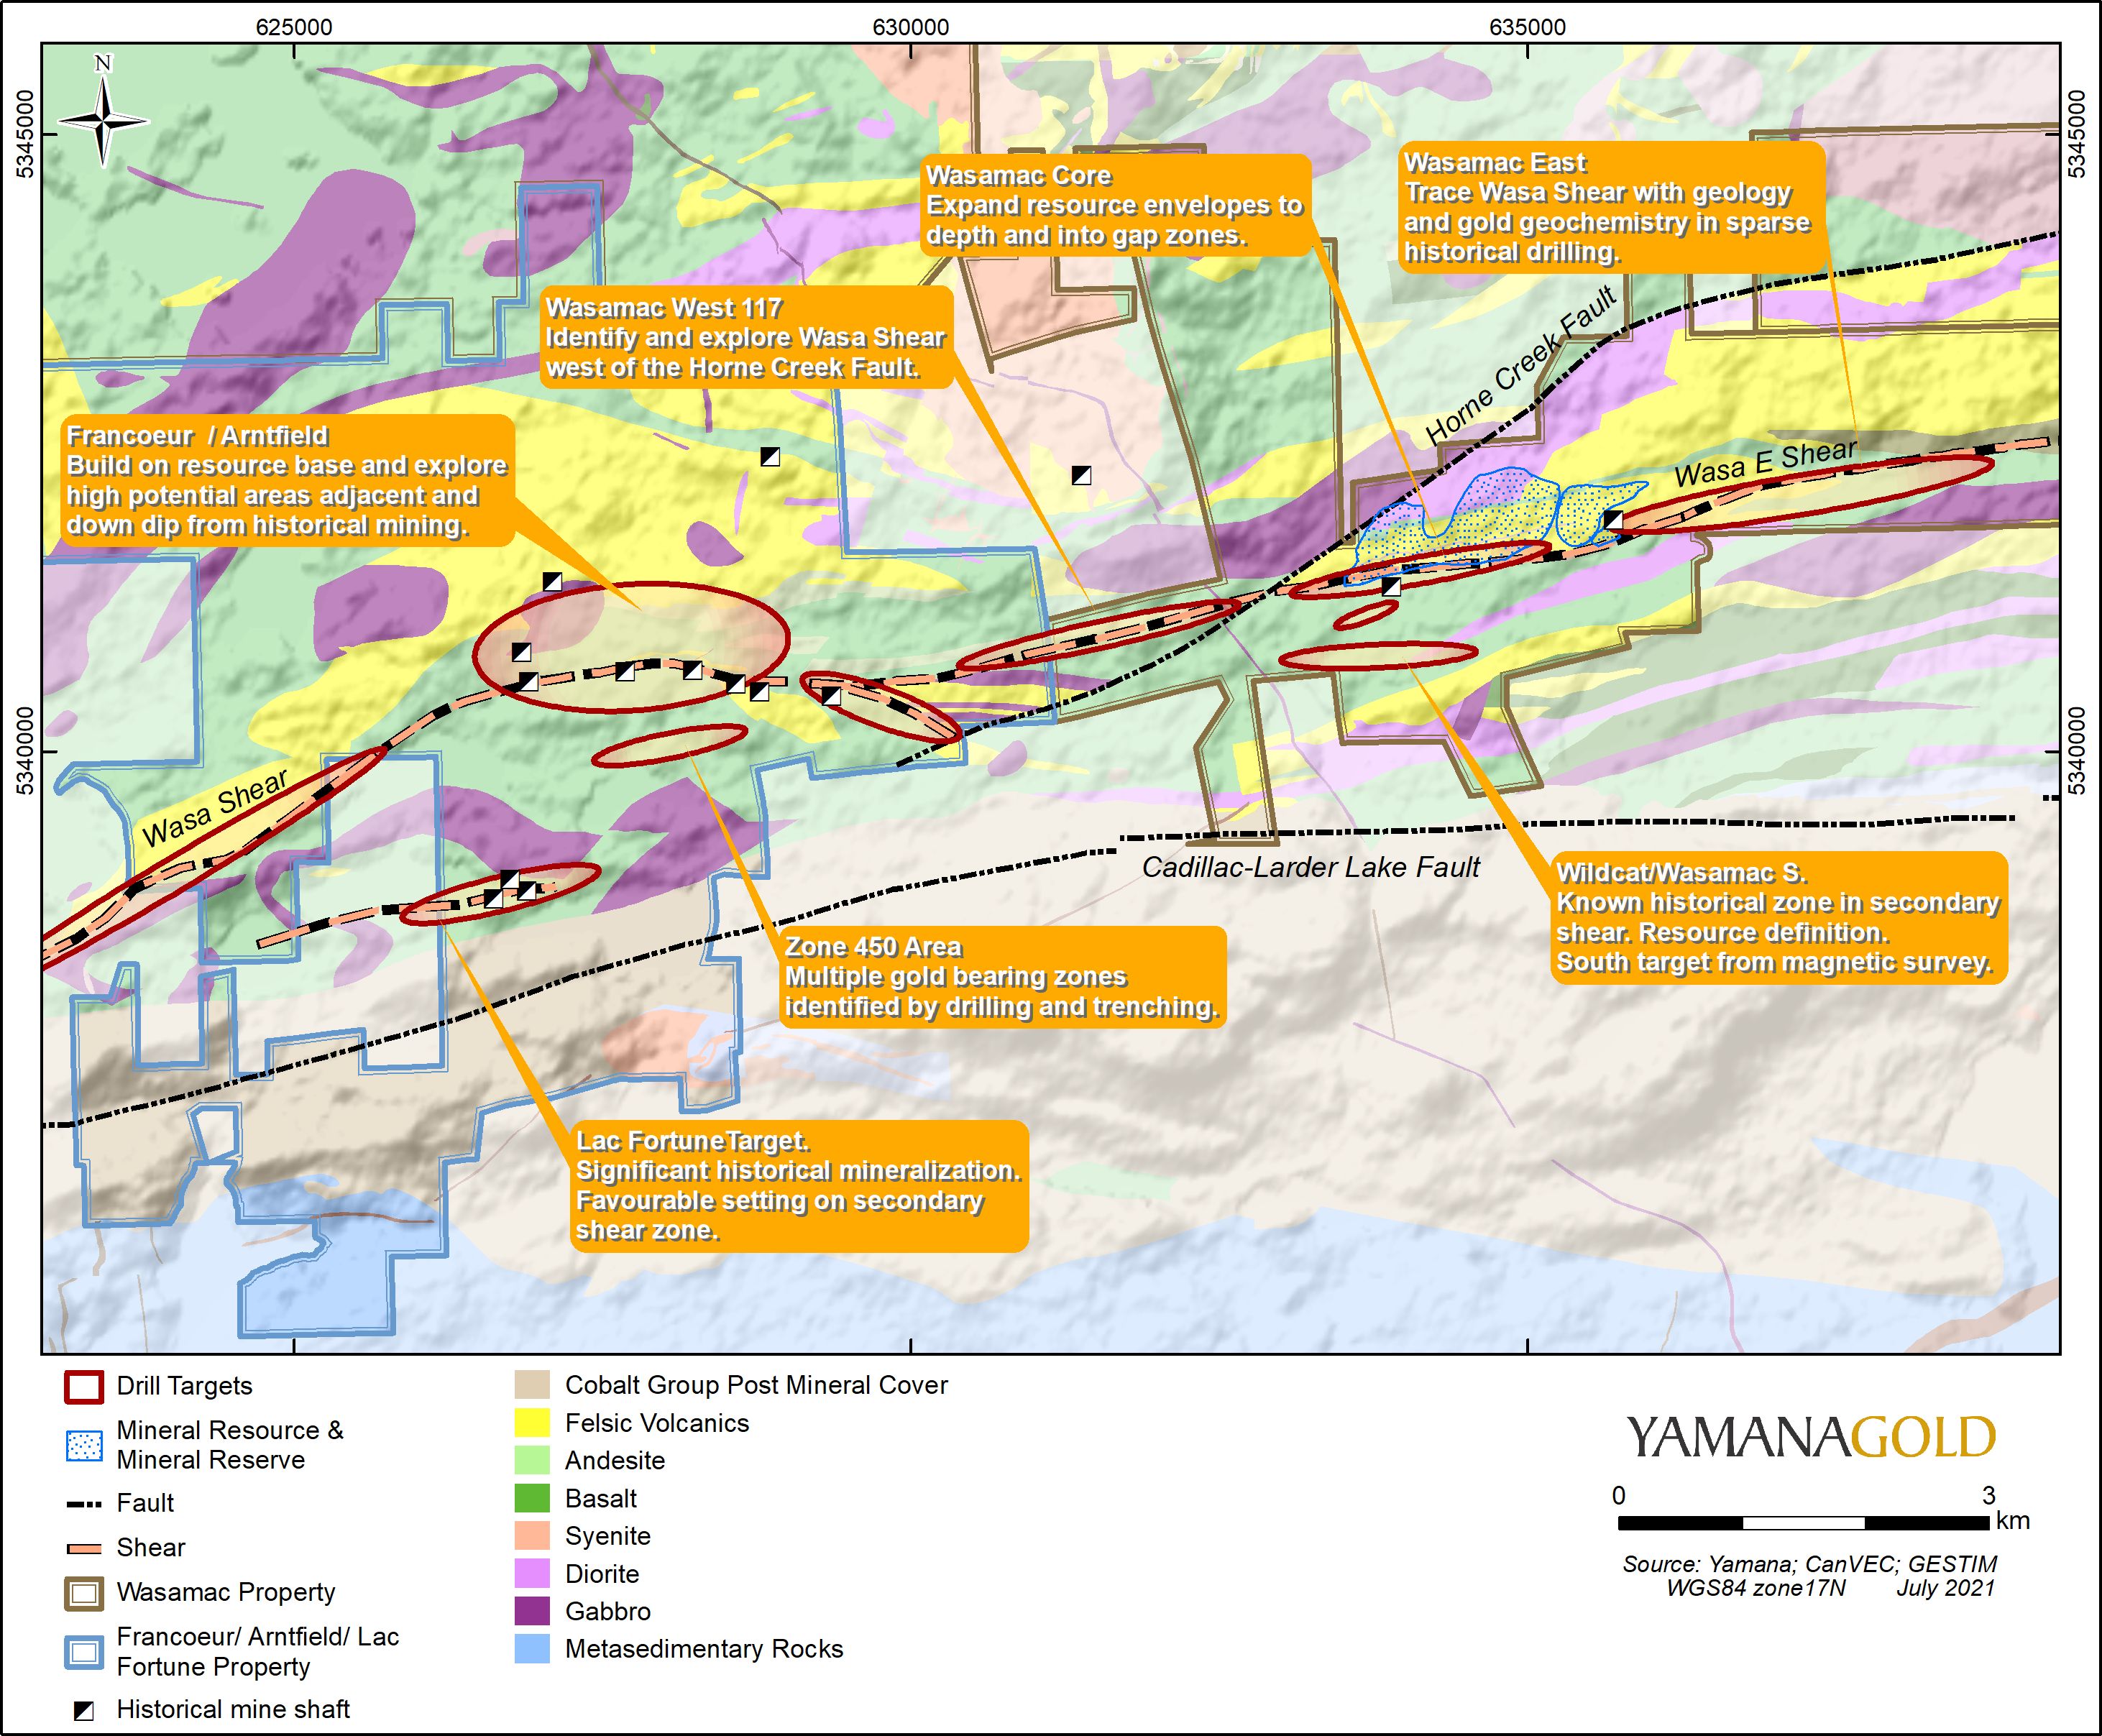 Wasamac Exploration Program Including Francoeur, Arntfield, and Lac Fortune